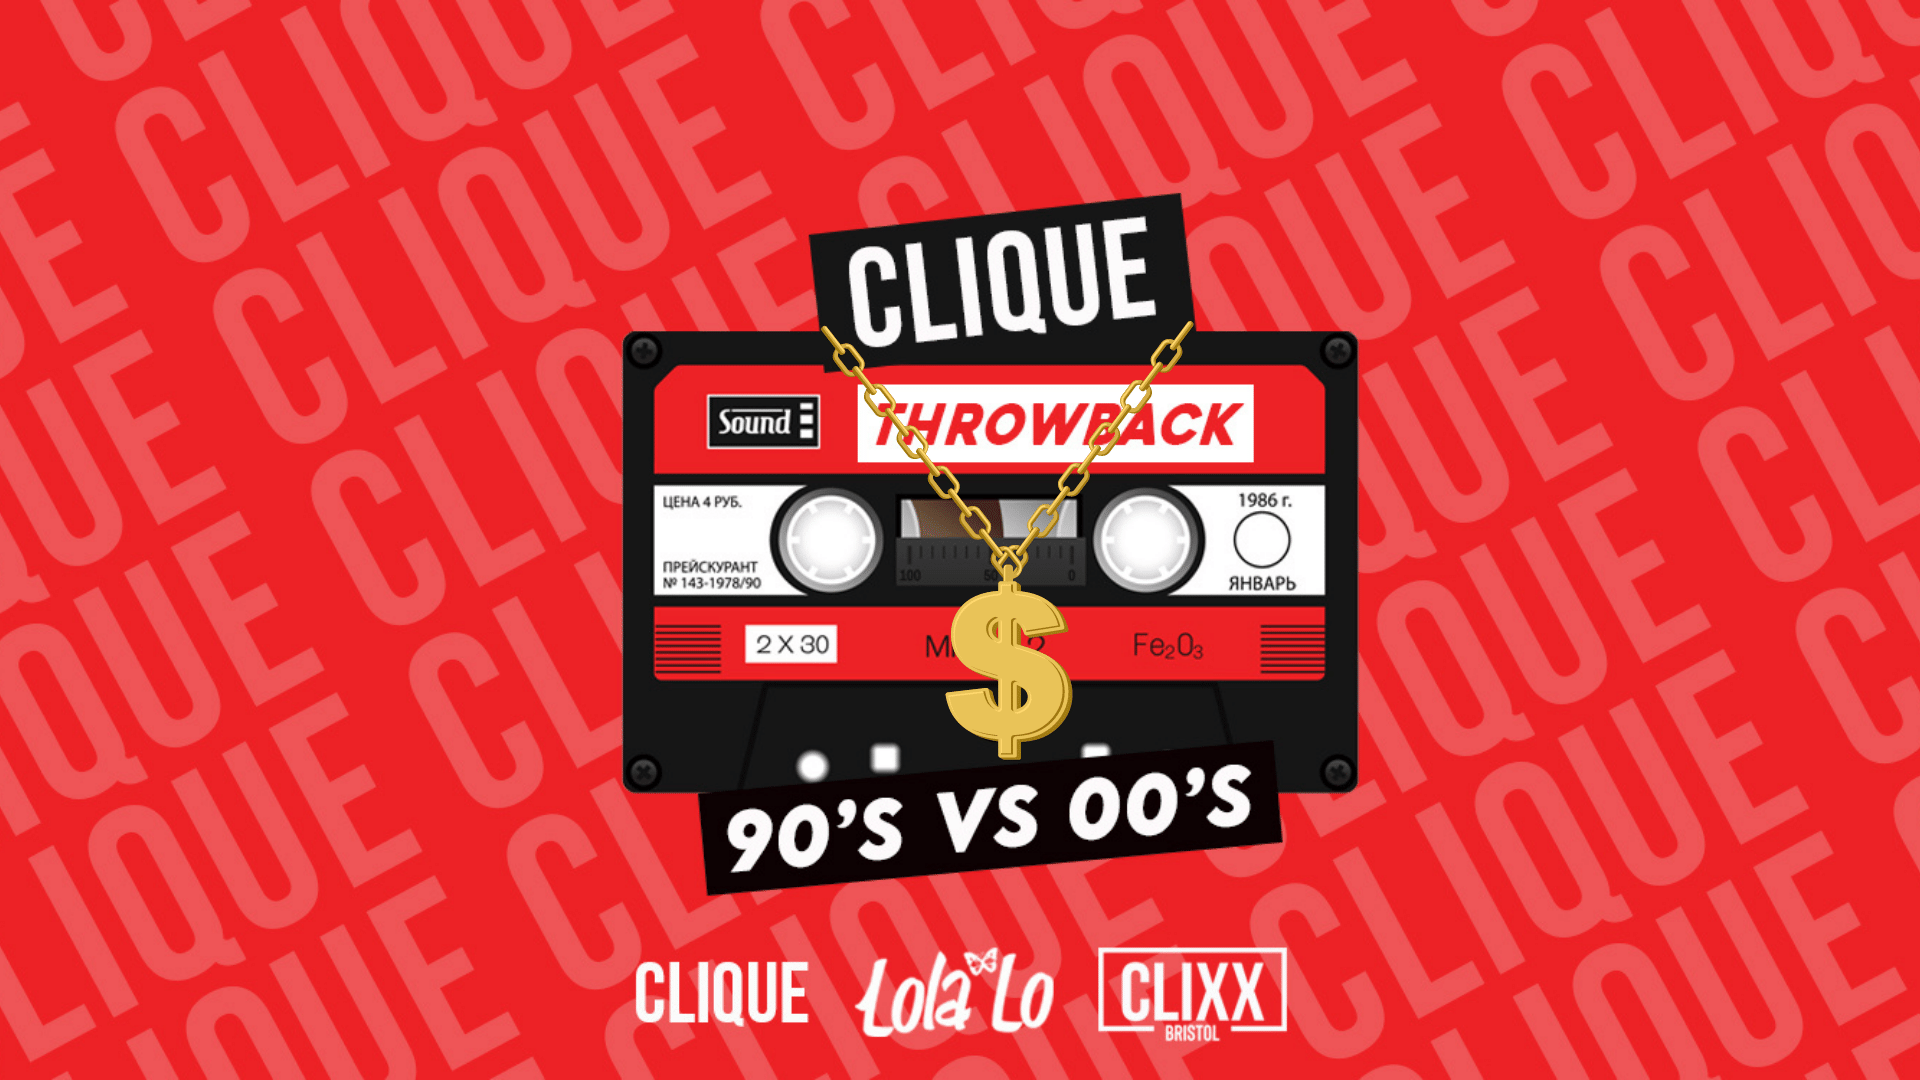 CLIQUE | Throwback  –  SOLD OUT – 100 SPACES ON THE DOOR